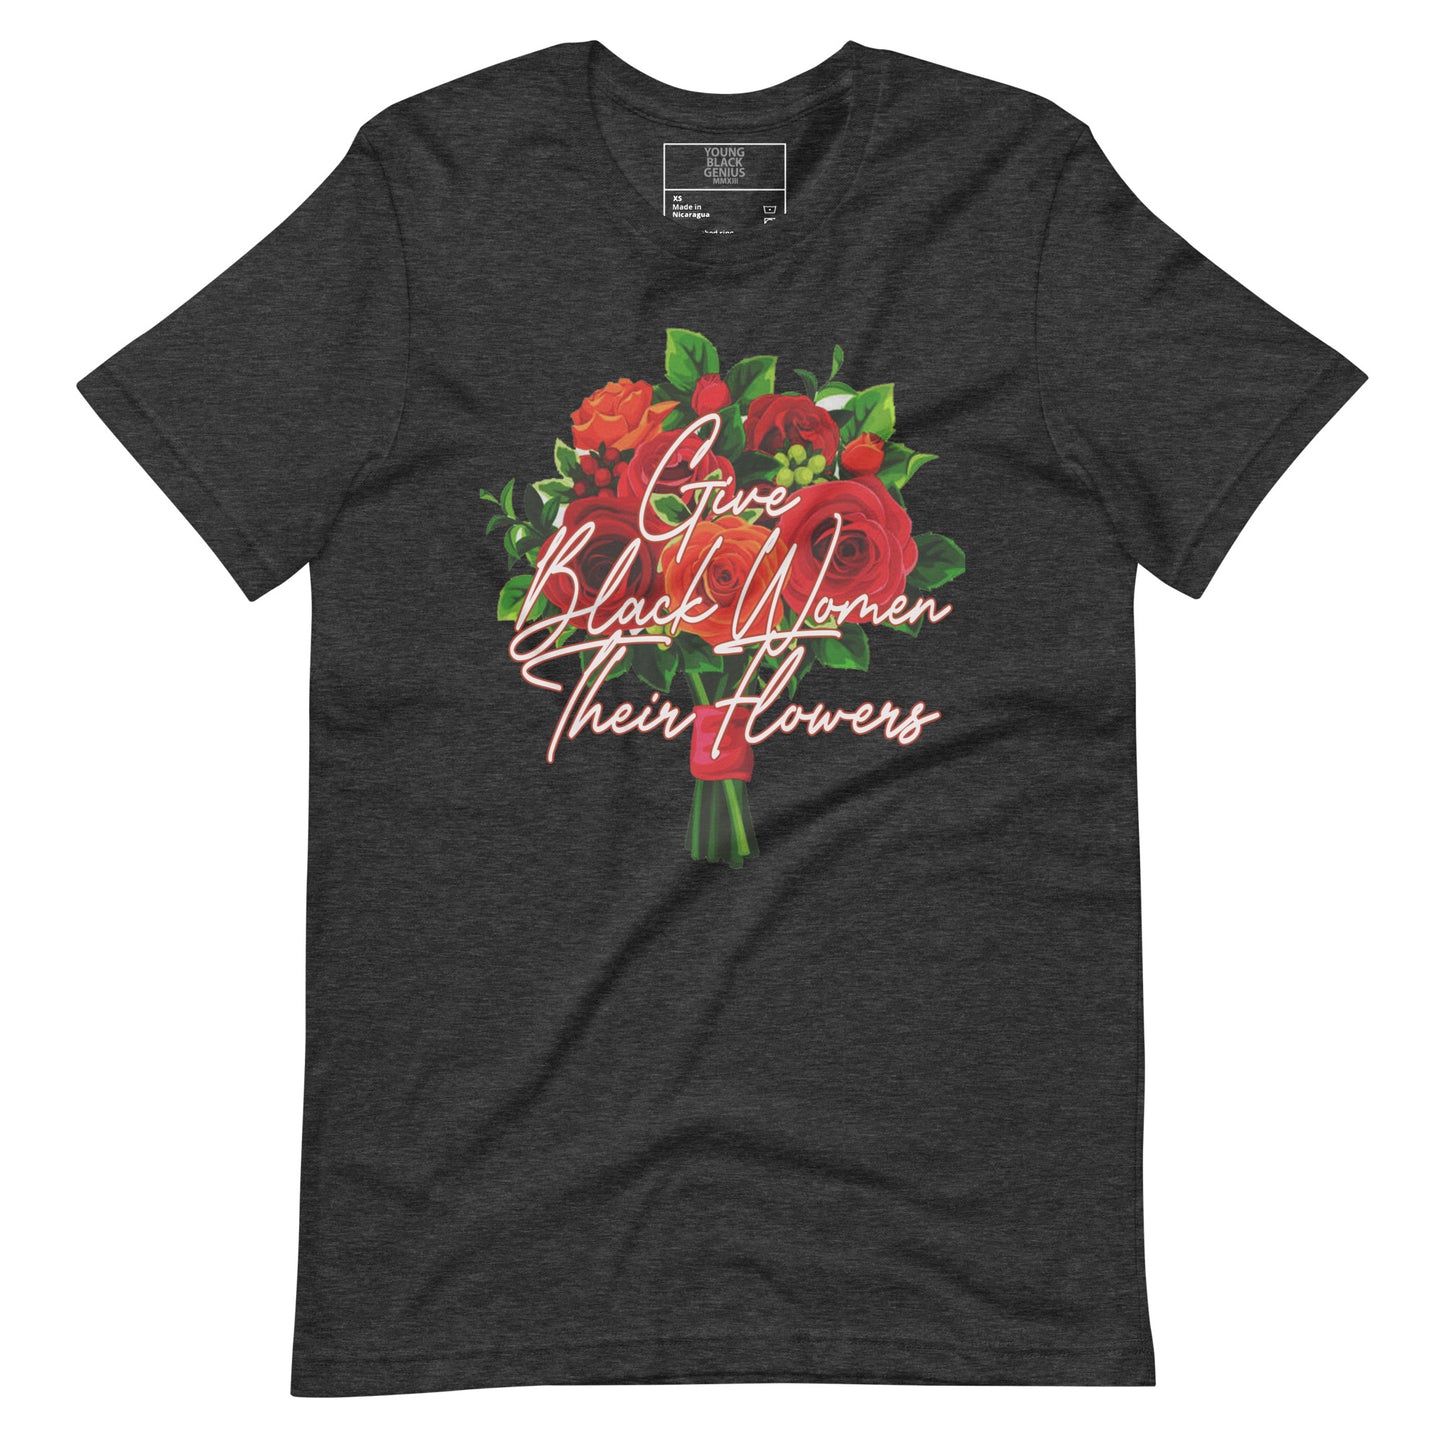 Give Black Women Their Flowers T-shirt